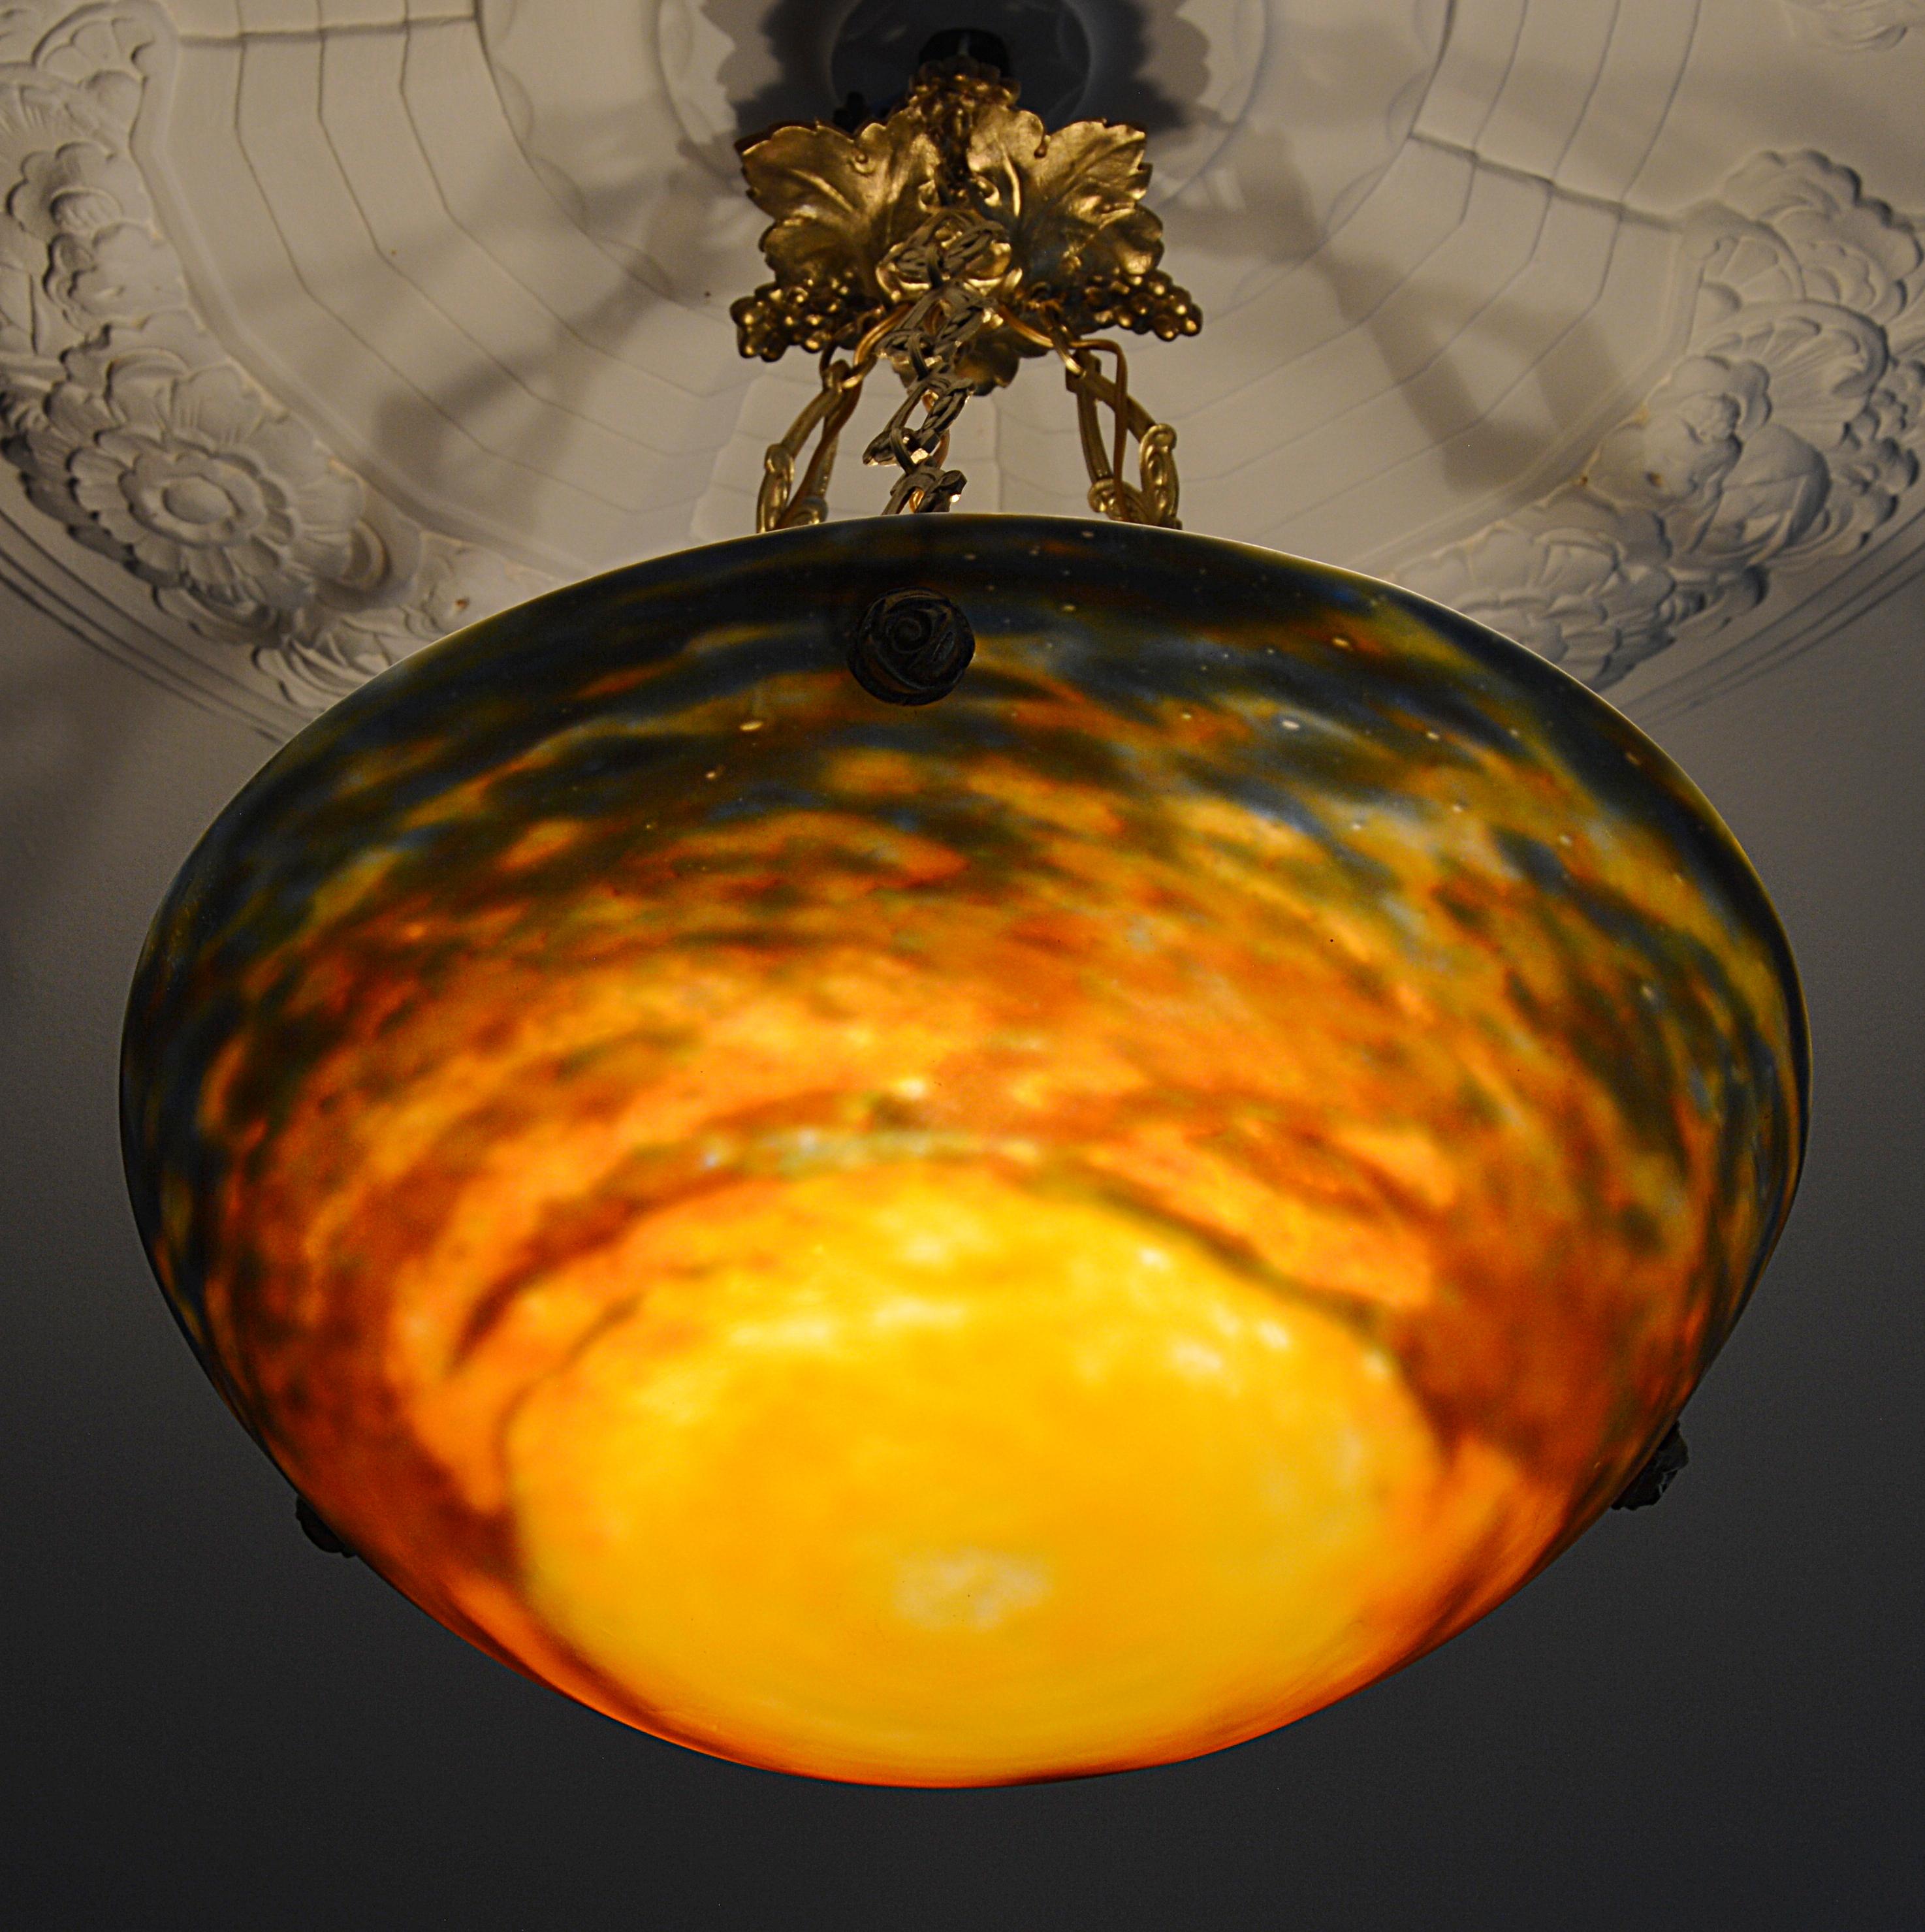 French Art Deco pendant by Muller Frères, Luneville, France, circa 1925. Mottled glass shade, powders are applied between two layers, that comes hung at its original brass fixture. Signed 